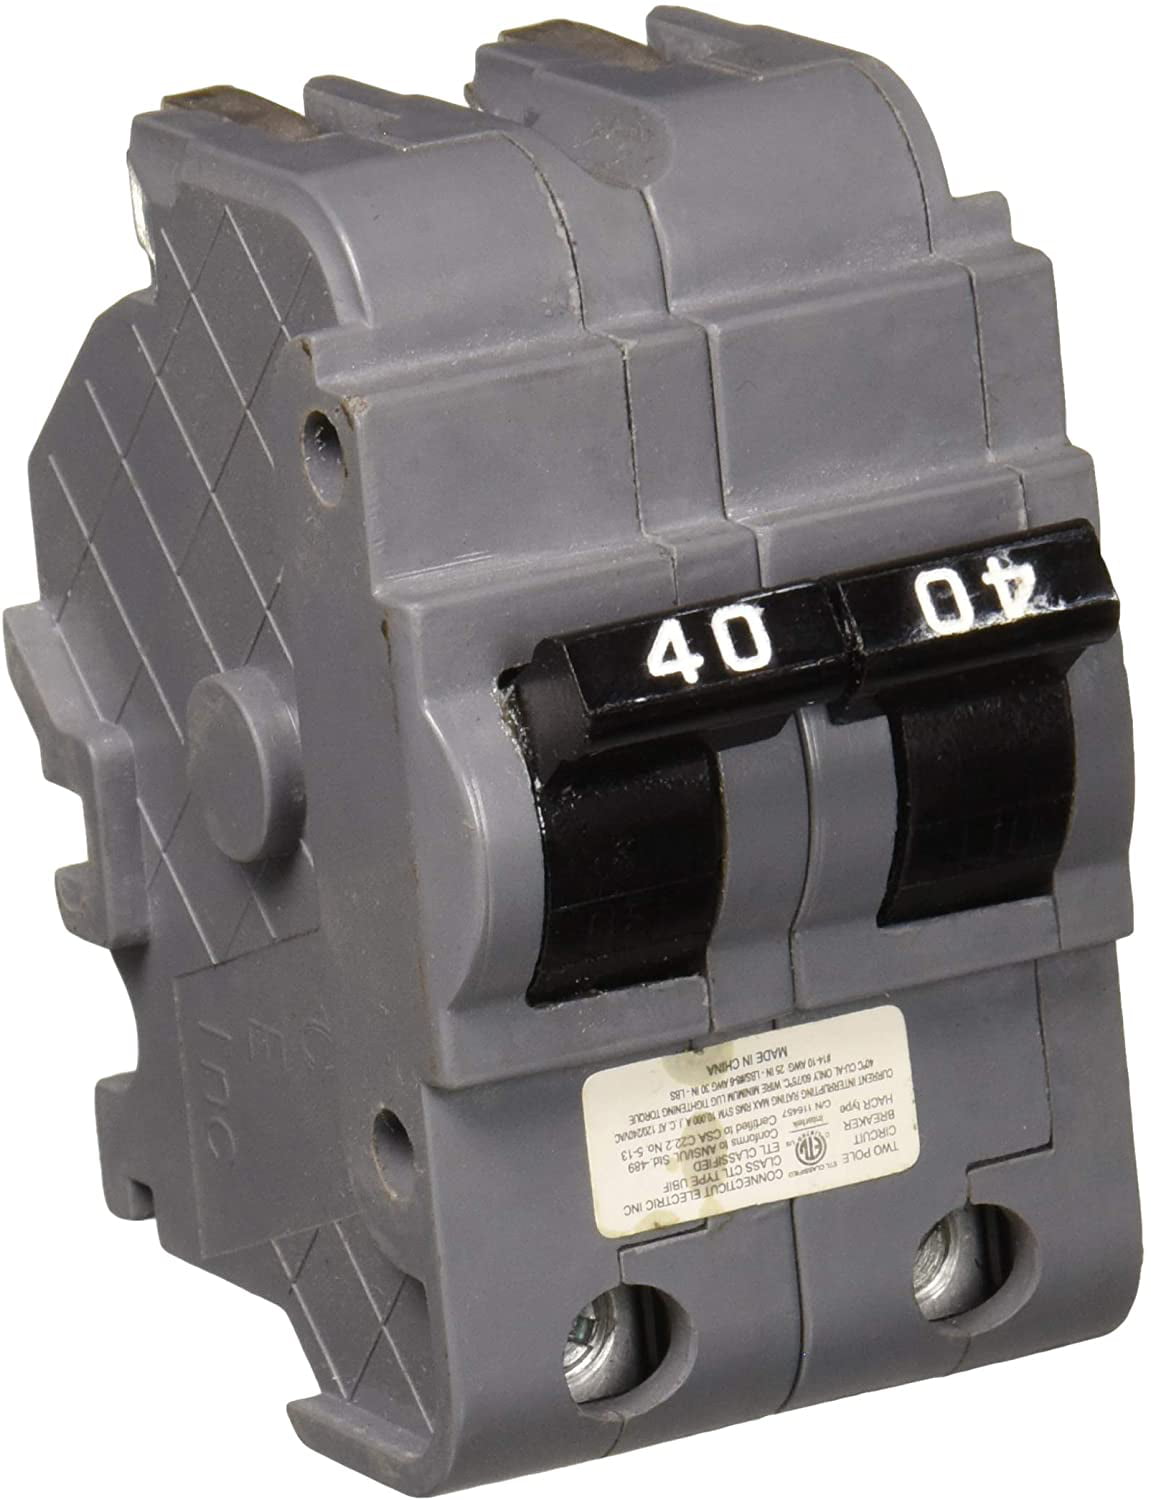 Federal Pacific 40 Amp 2 or Double Pole 1" Thin Breaker FPE 40A 